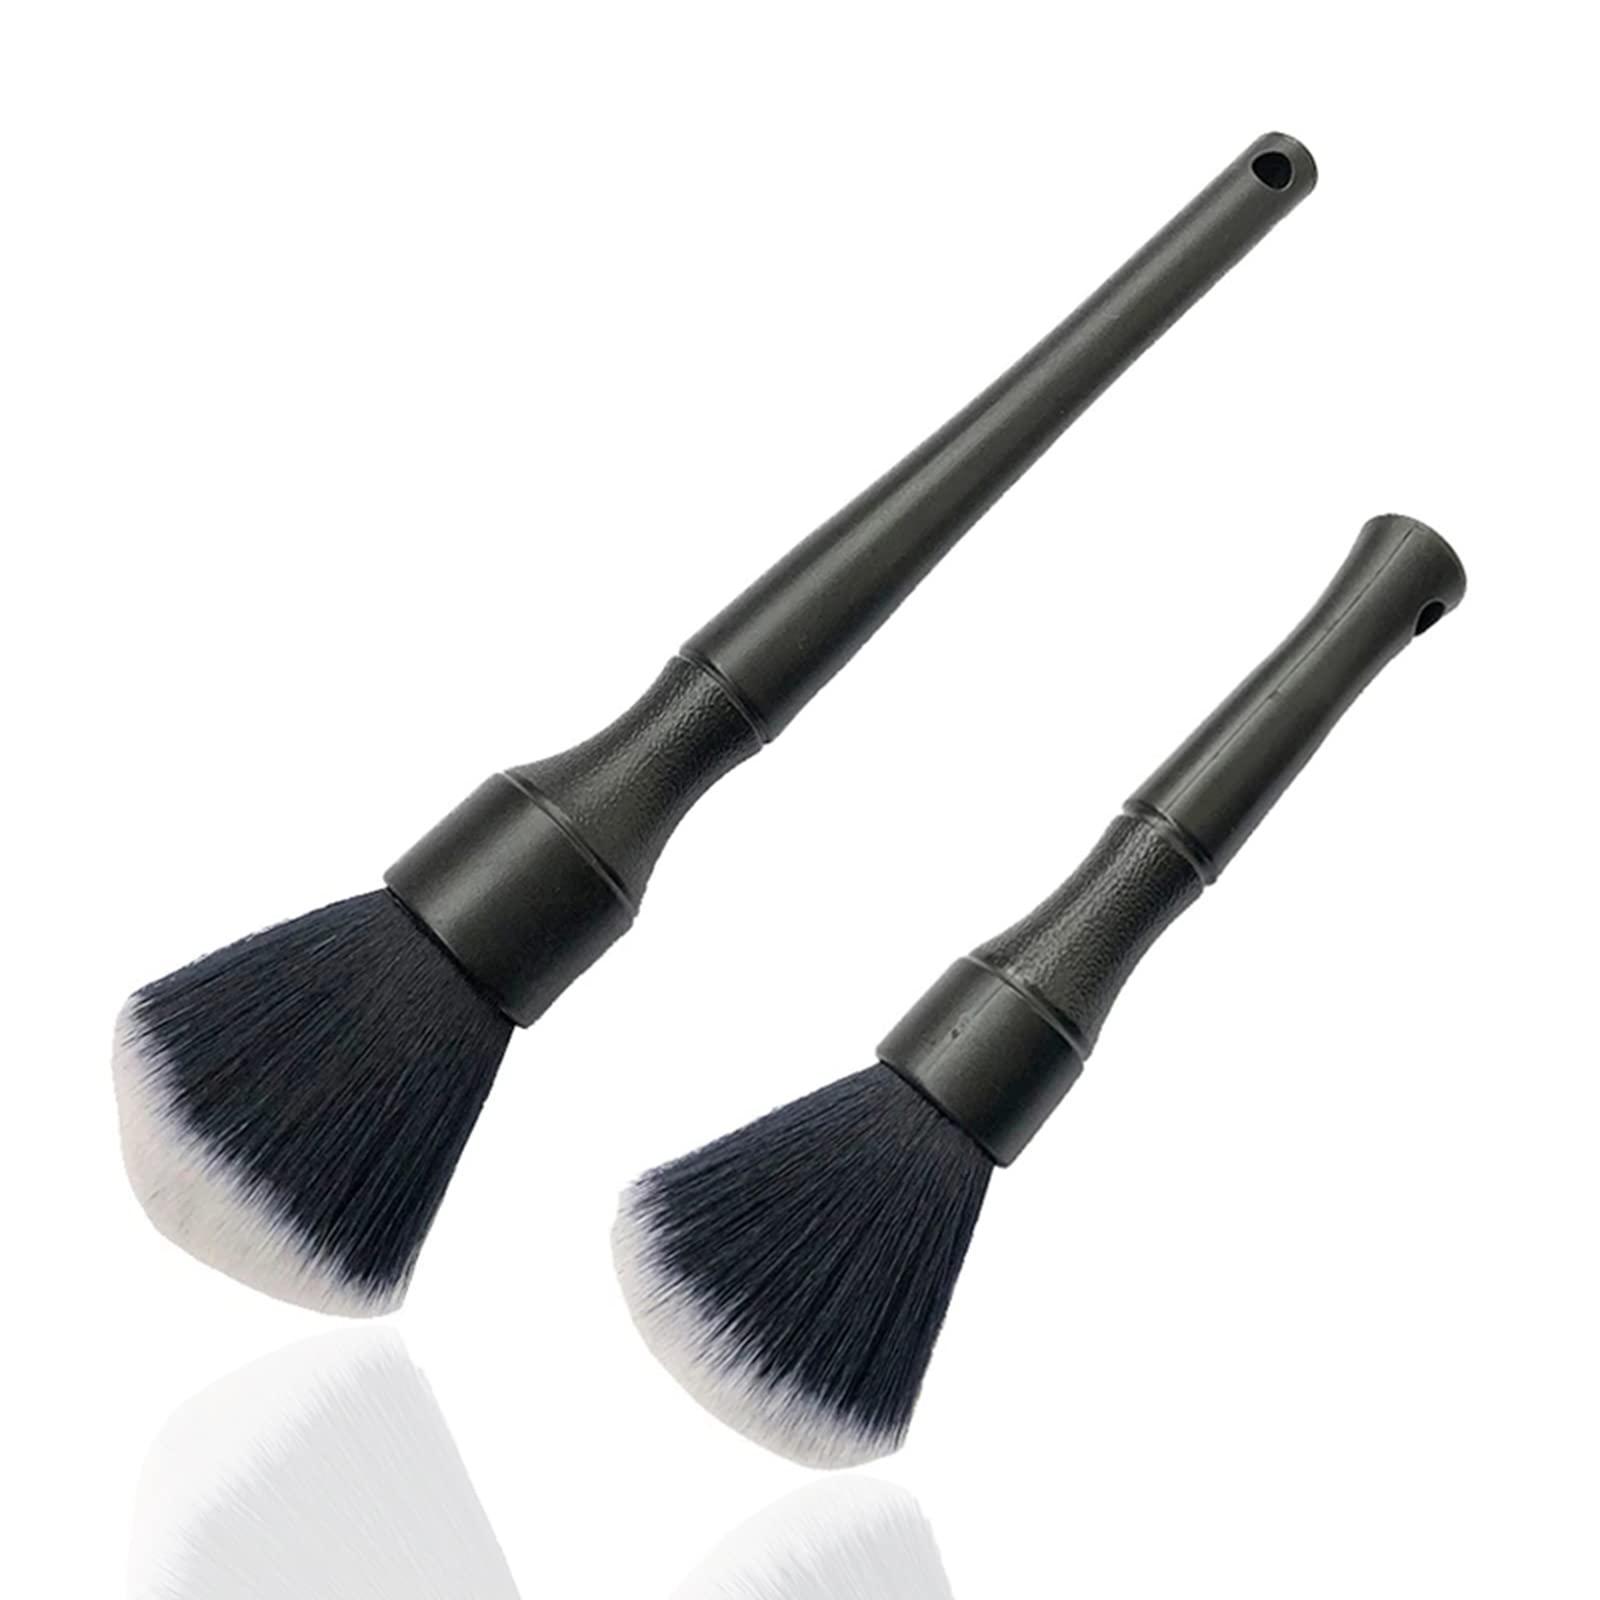 ALI2 Detailing Brush Set,Soft Comfortable Grip for Car Interior and Exterior Detailing Cleaning,Black 5